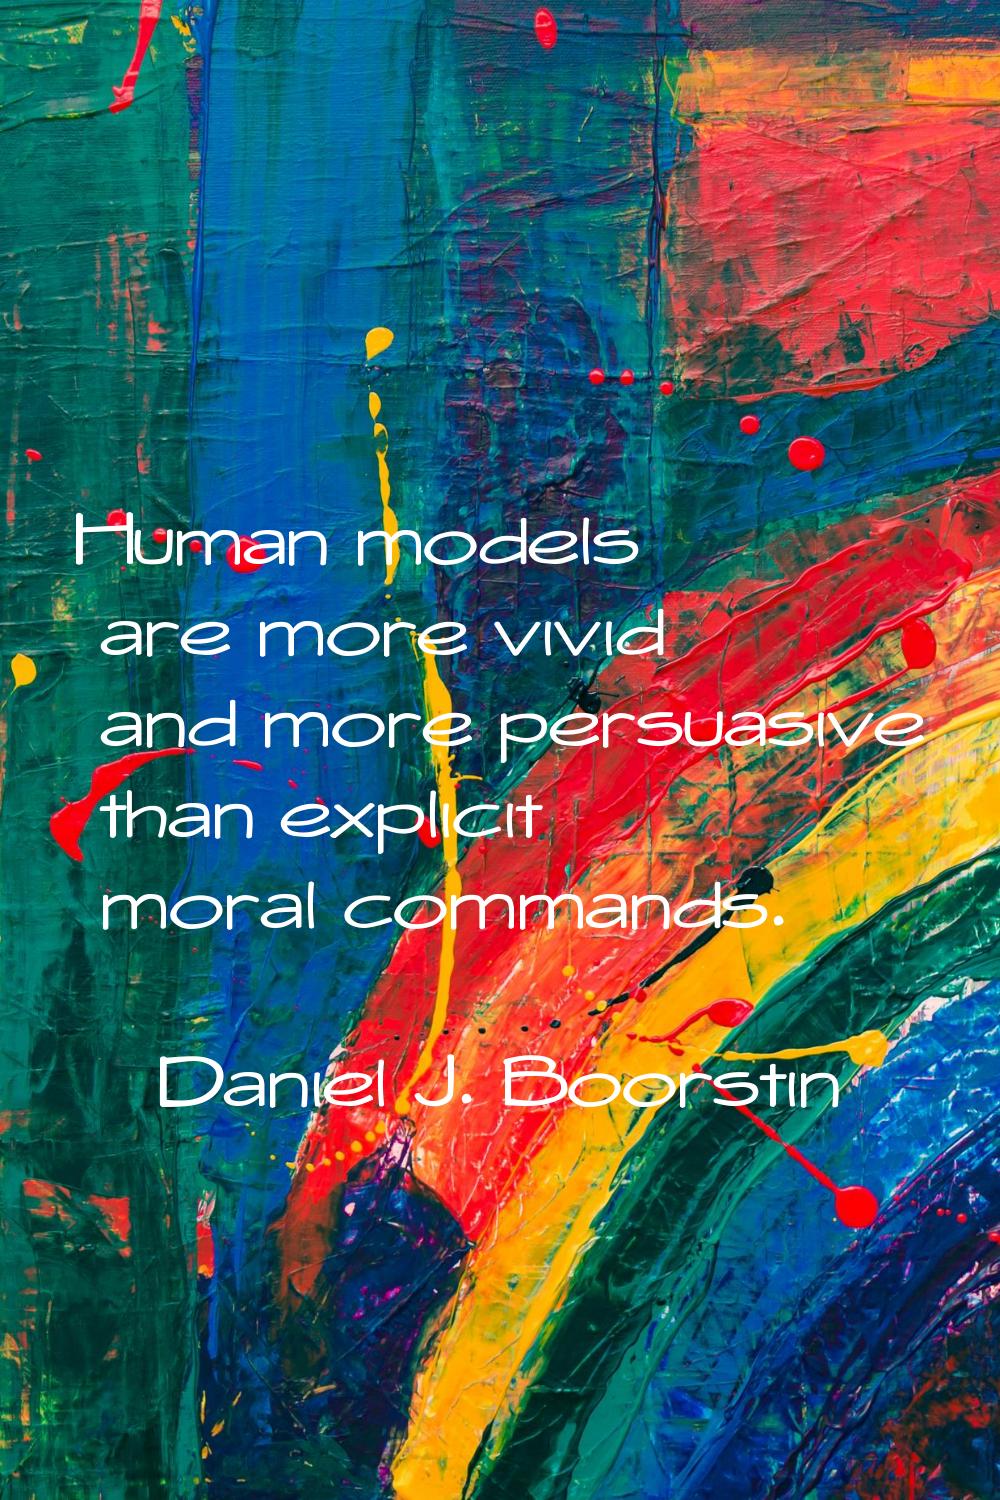 Human models are more vivid and more persuasive than explicit moral commands.